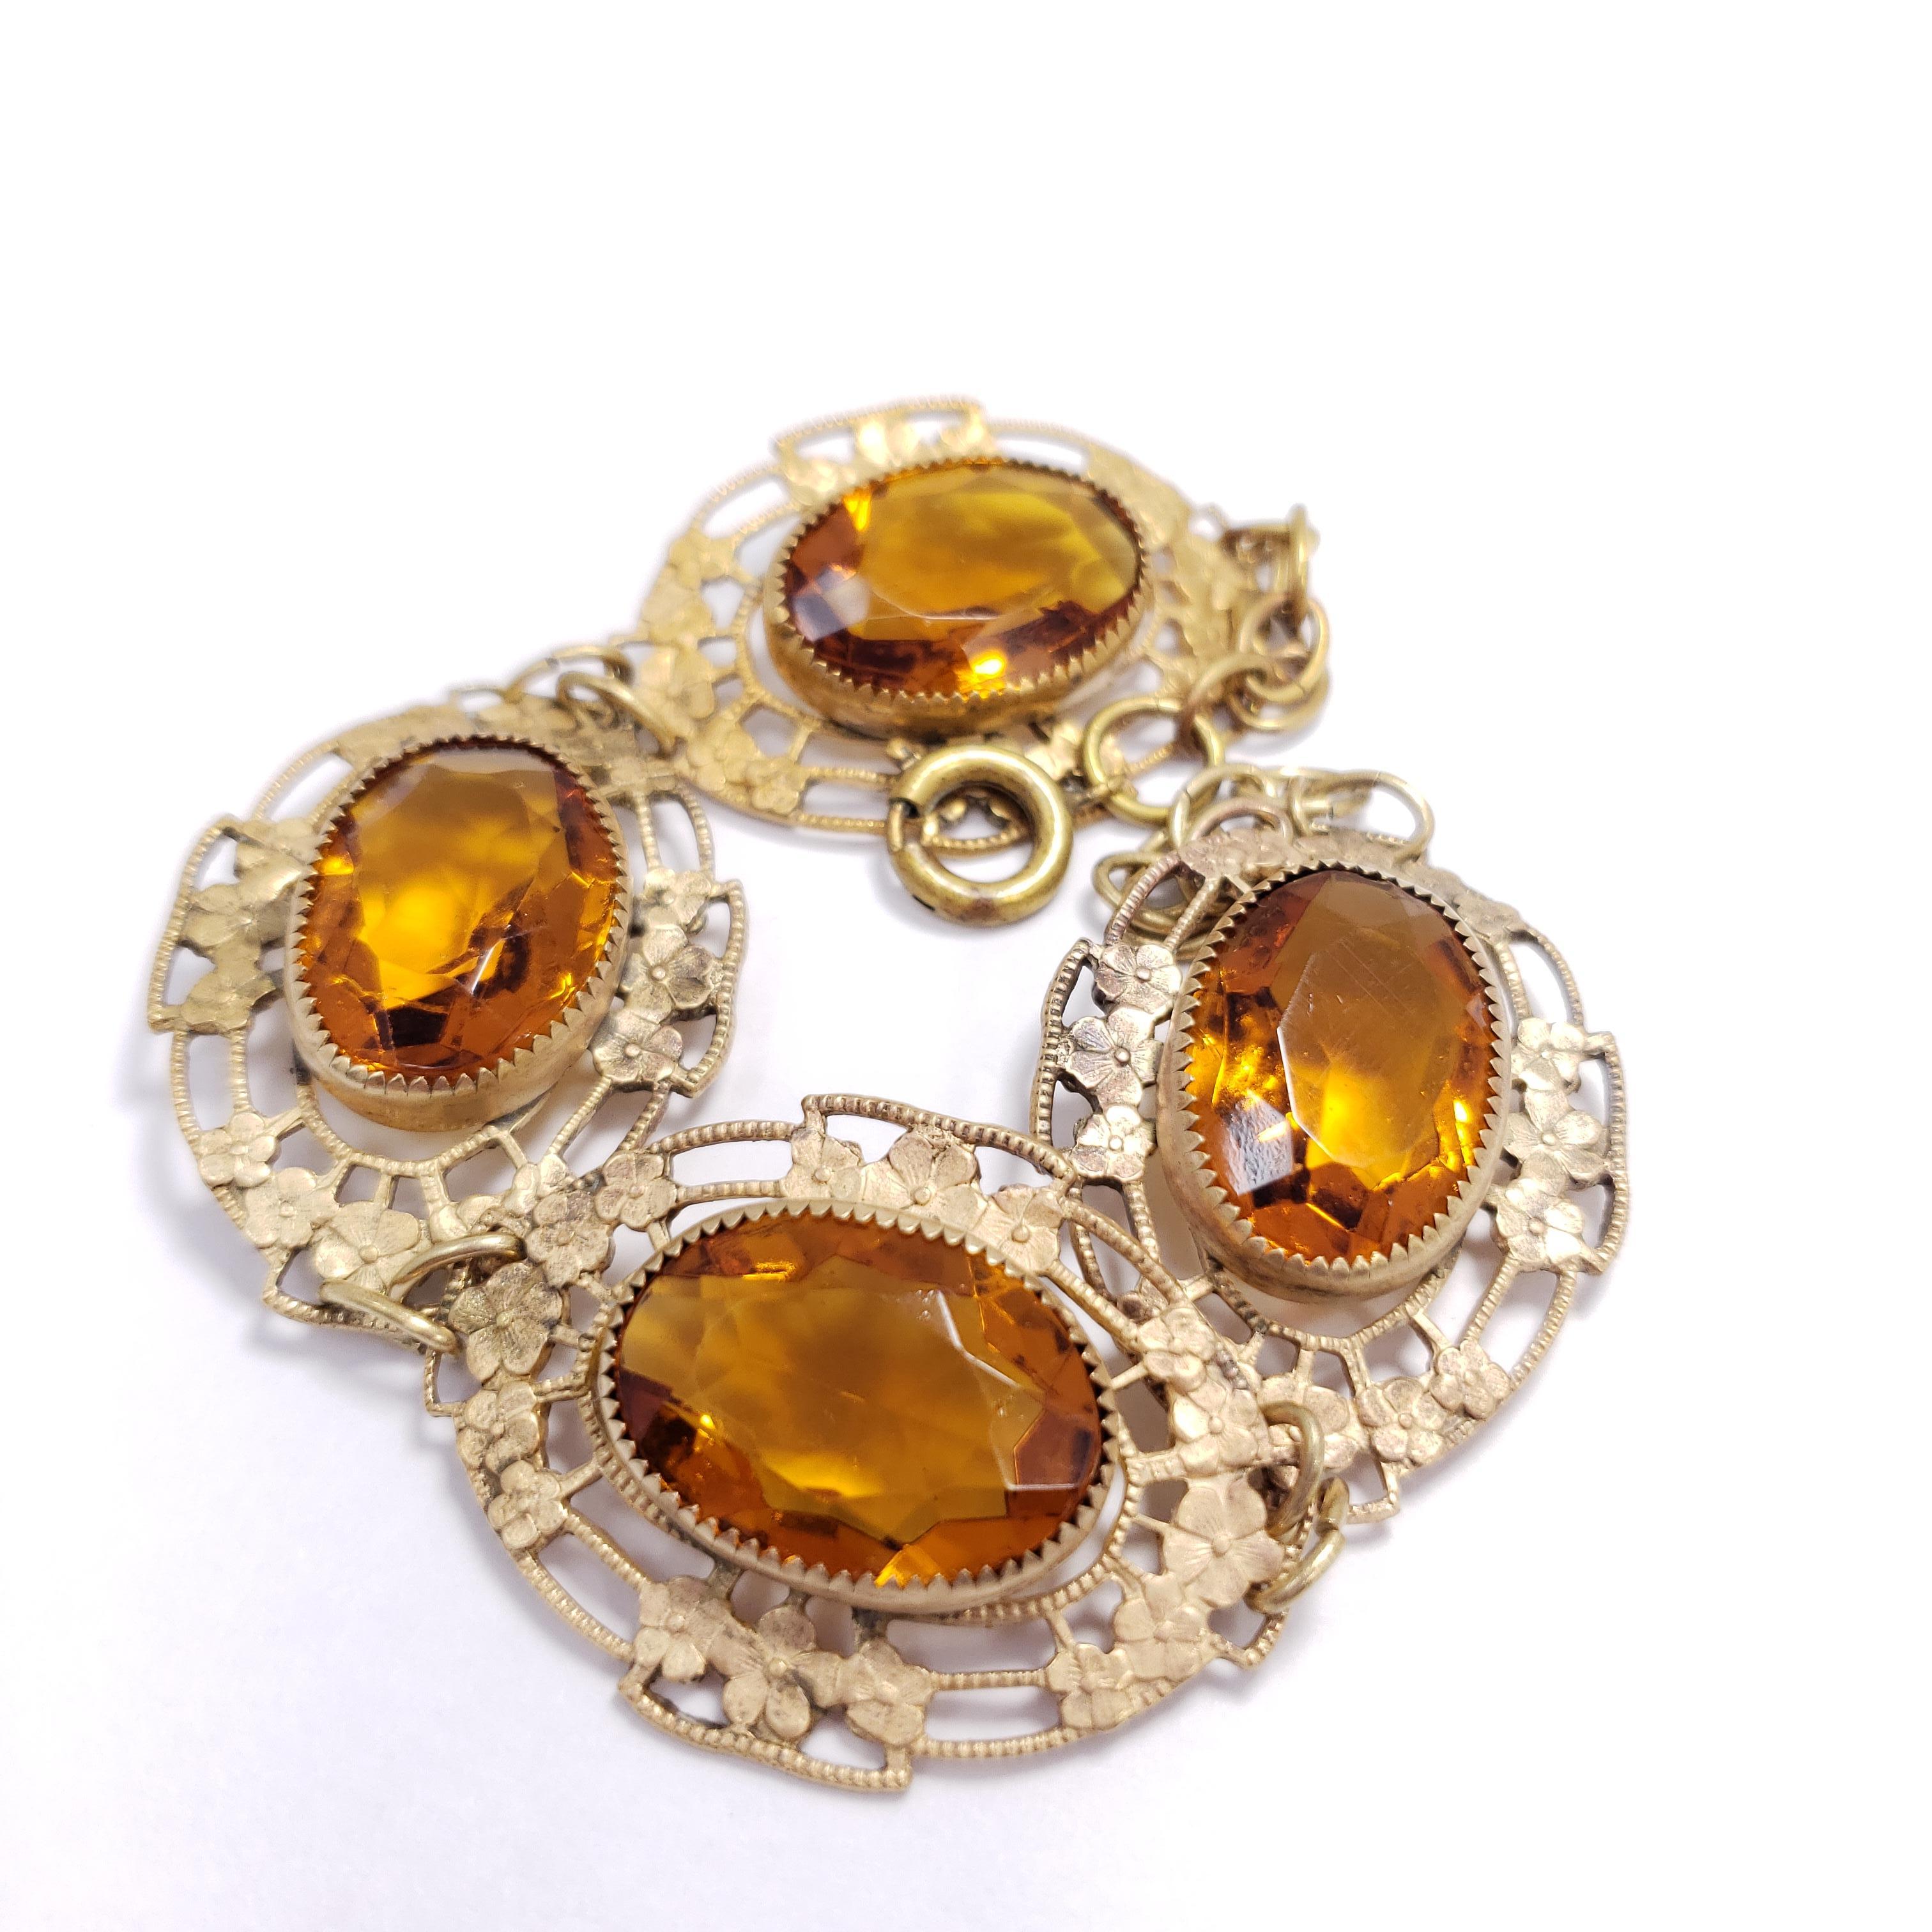 An elegant vintage bracelet. Features four floral-themed, brass-tone links, each with a mesmerizing, open-back, amber crystal.

Spring ring closure.
